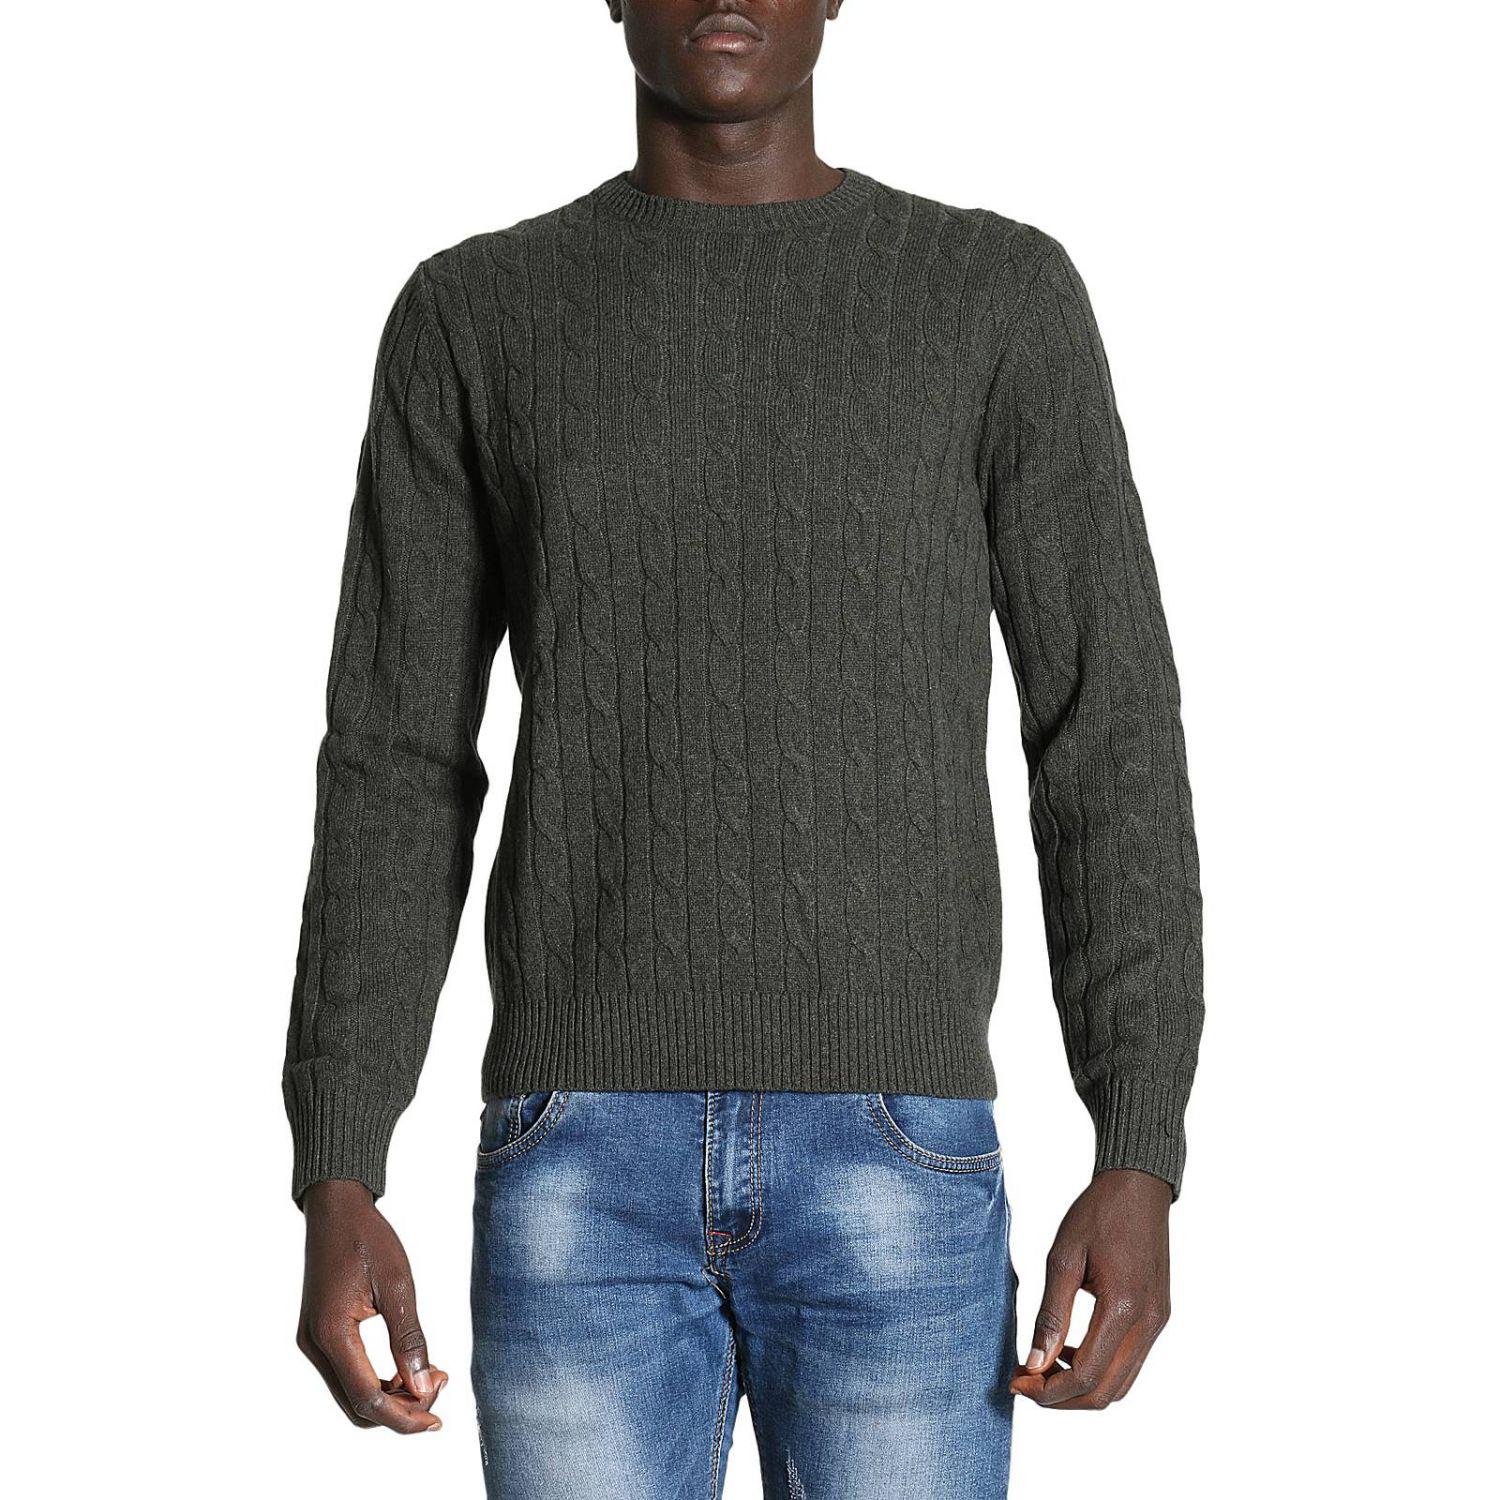 Lyst - Brooks Brothers Sweater Men in Green for Men